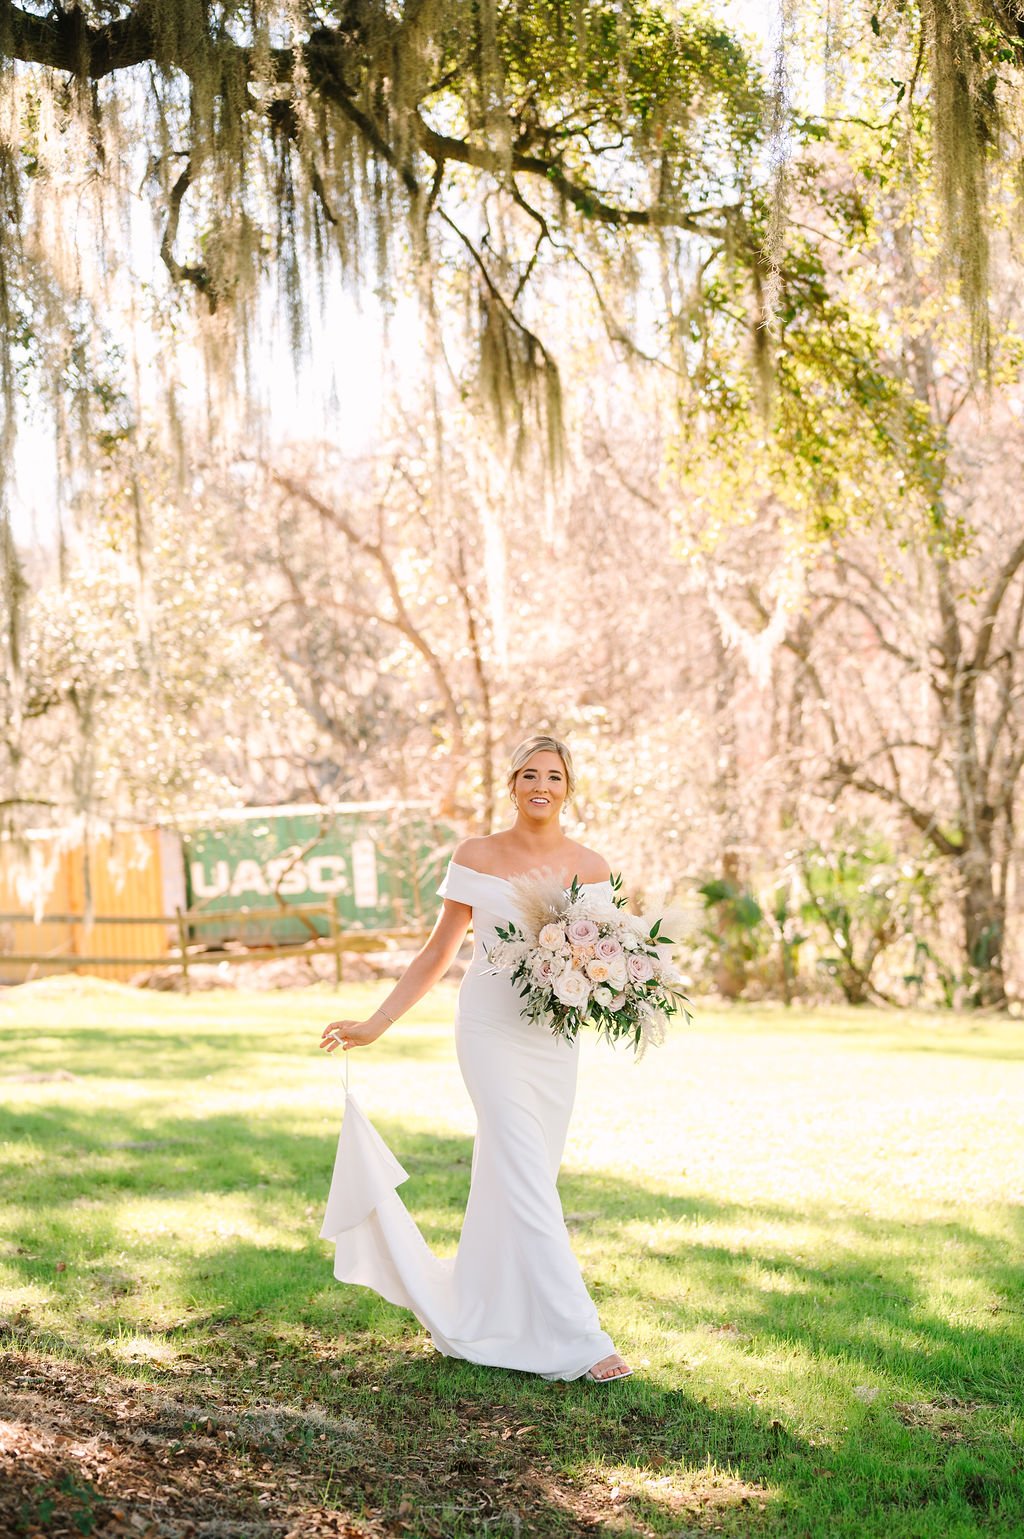 delaney-and-joshuas-real-savannah-wedding-at-red-gate-farms-planned-by-savannah-wedding-planner-ivory-and-beau-with-wedding-florals-from-savannah-wedding-florist-ivory-and-beau-shot-by-5d-photography-savannah-wedding-savannah-bride-3.jpg